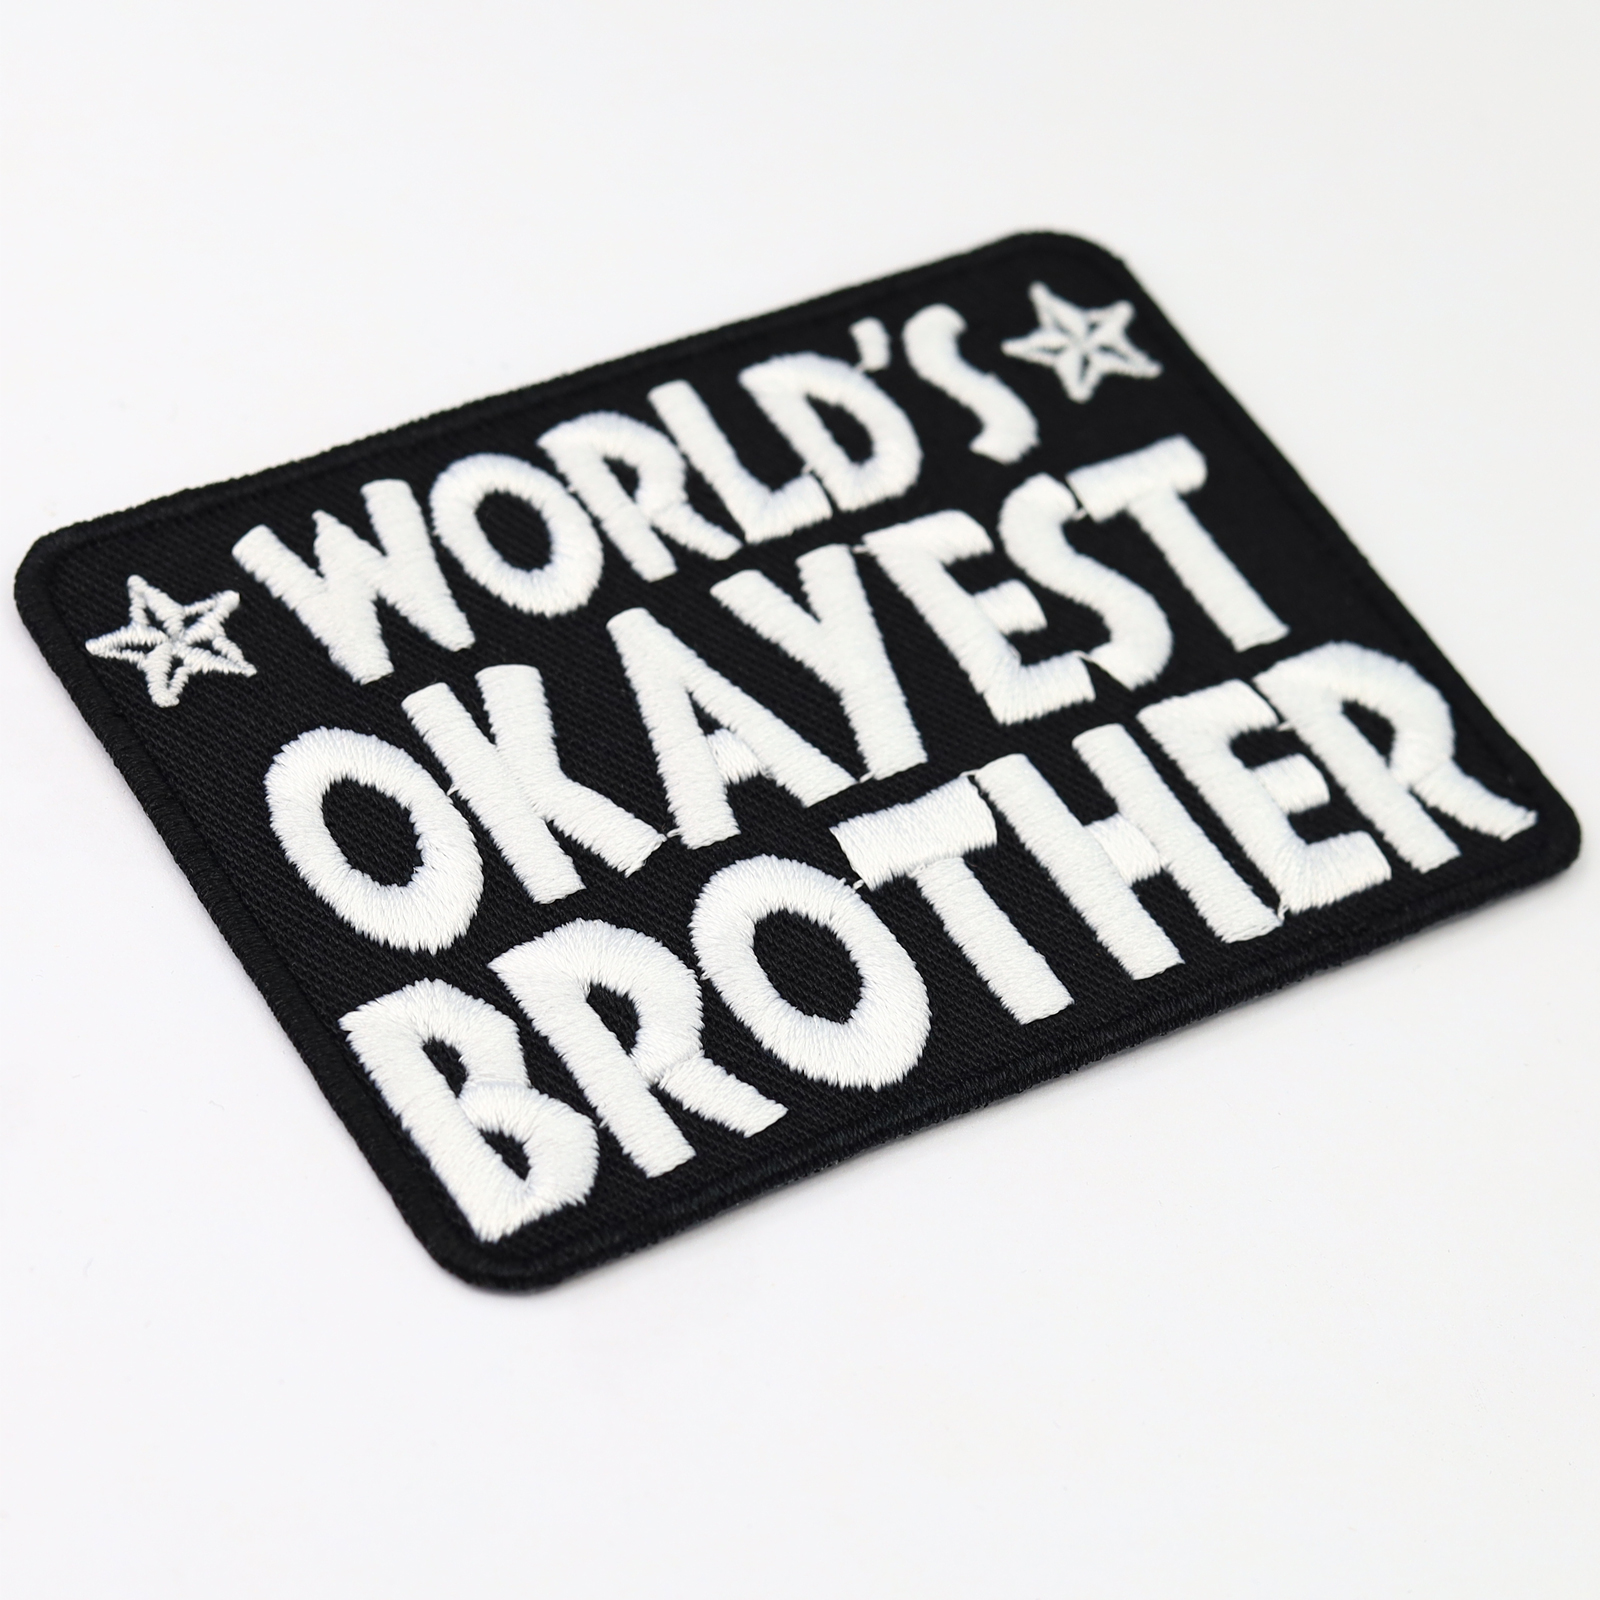 World´s okayest brother - Patch